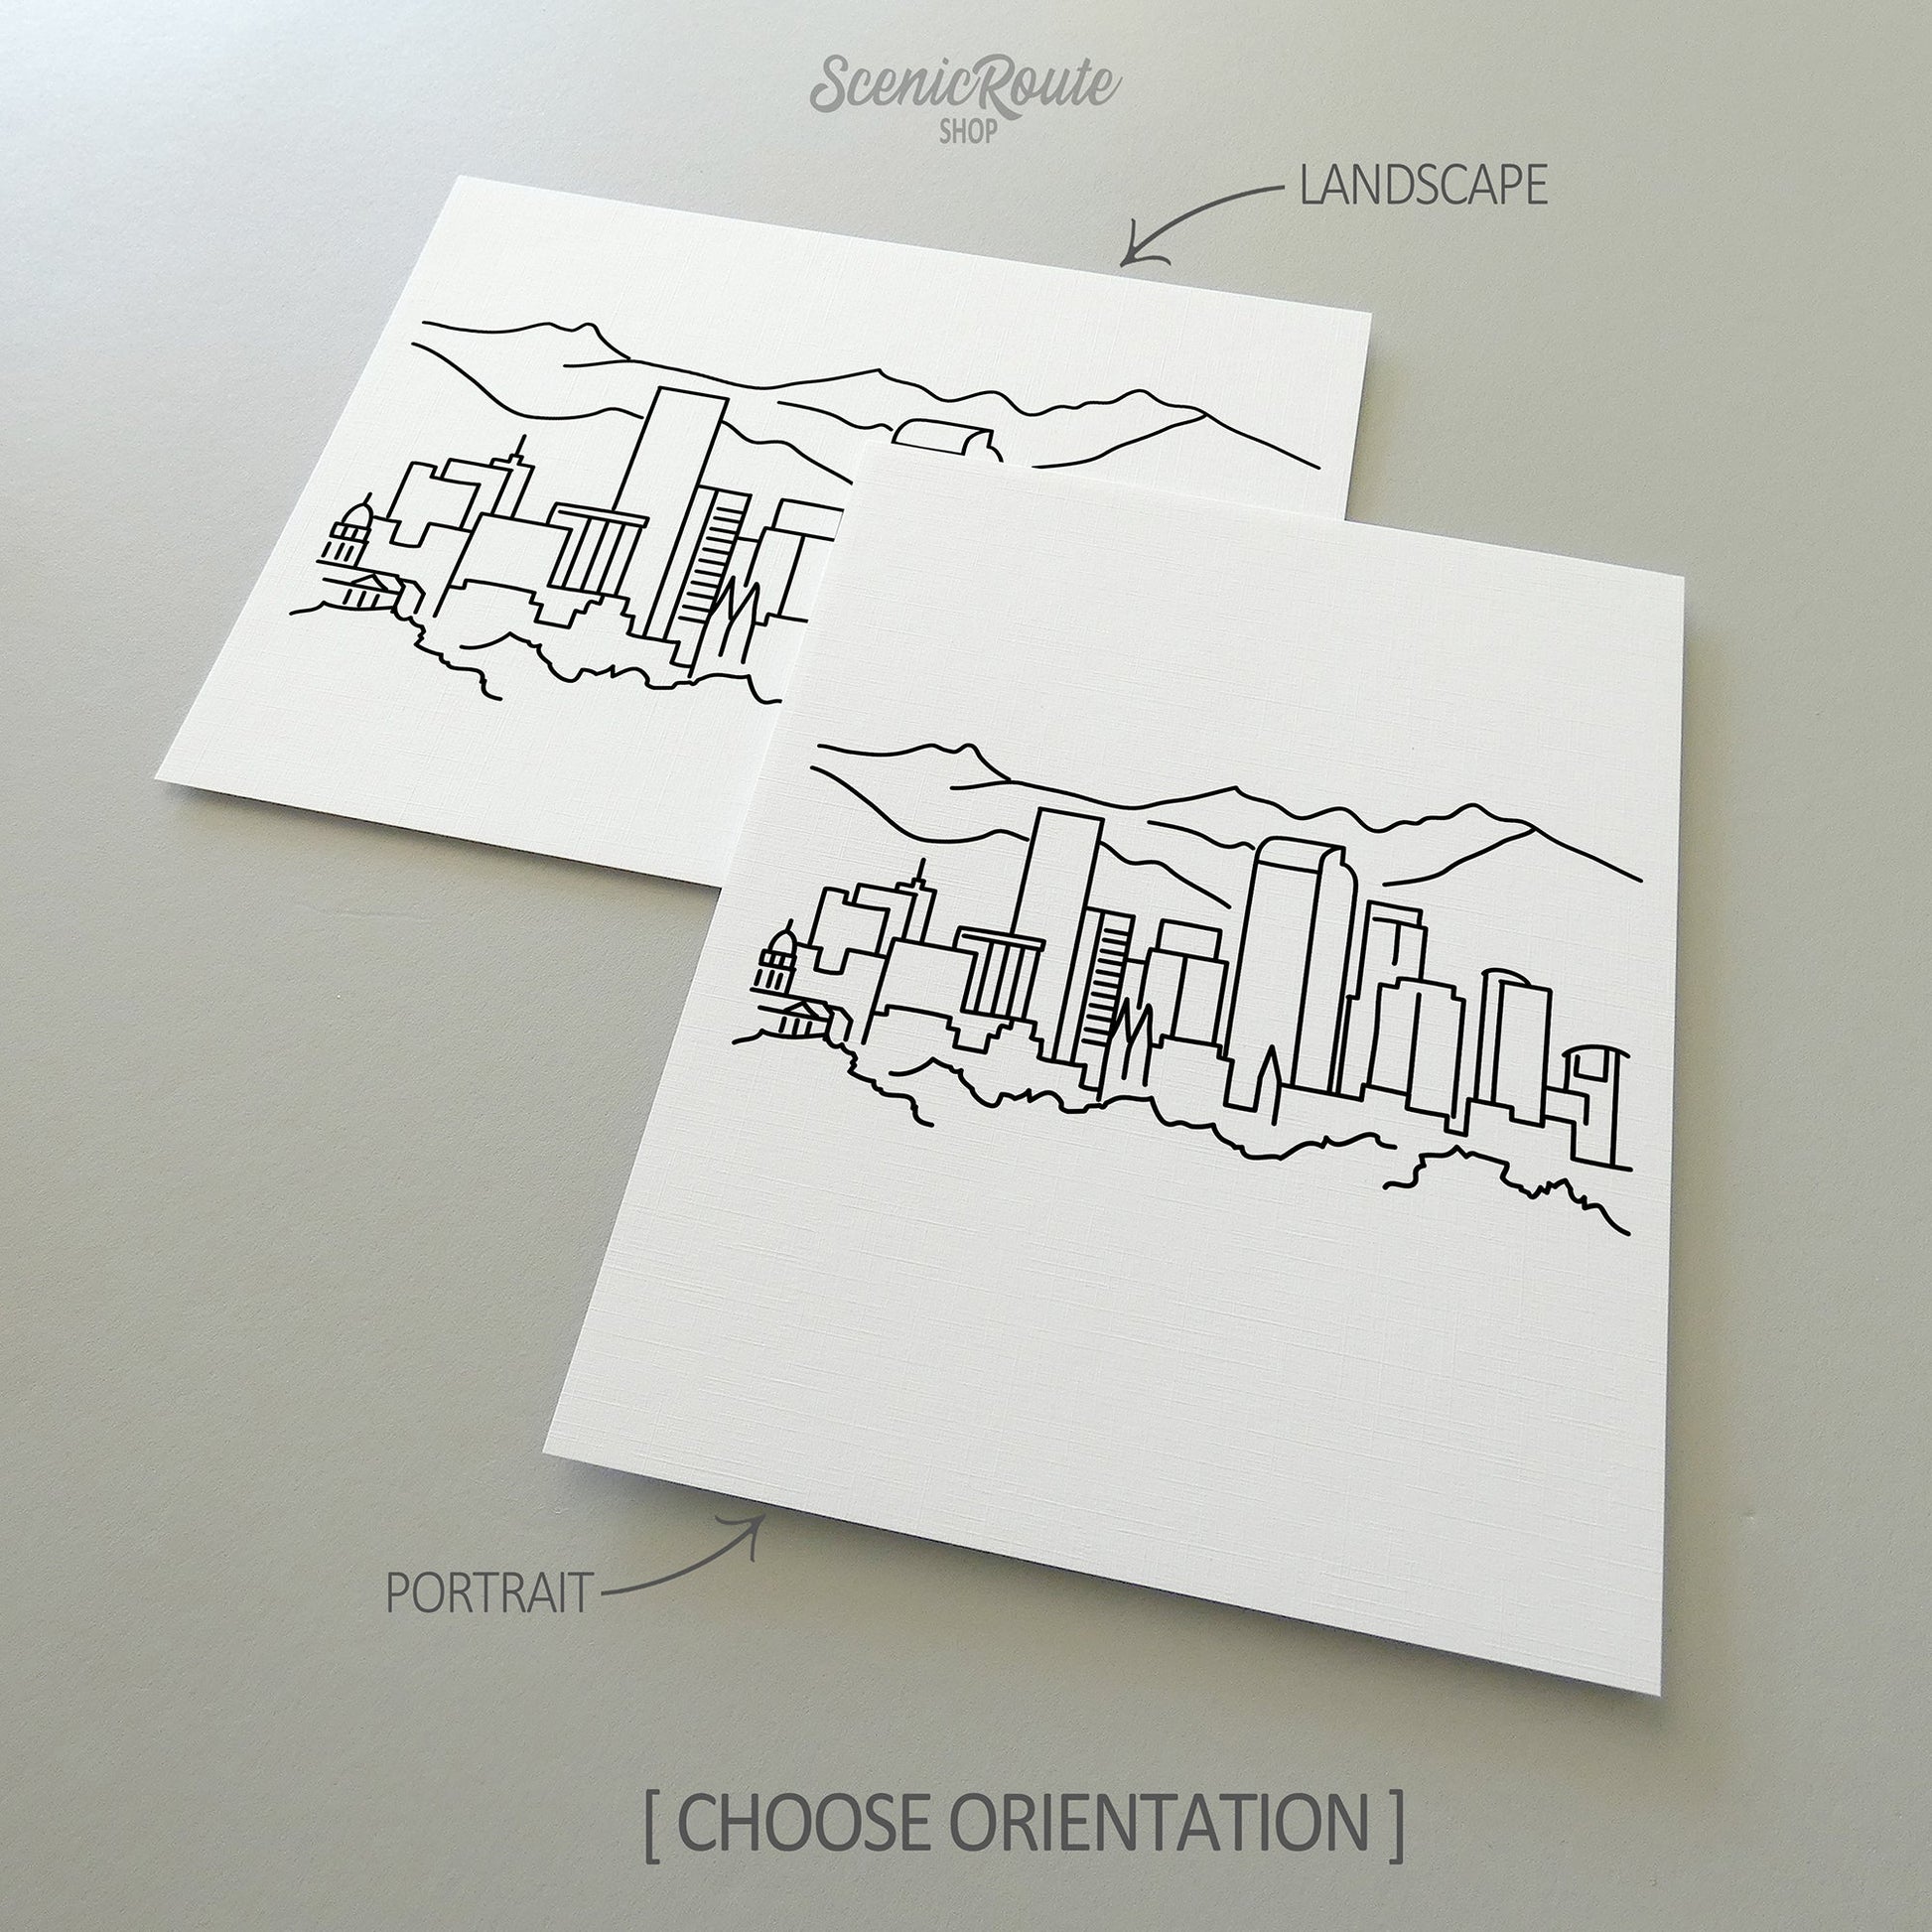 Two line art drawings of the Denver Skyline on white linen paper with a gray background.  The pieces are shown in portrait and landscape orientation for the available art print options.